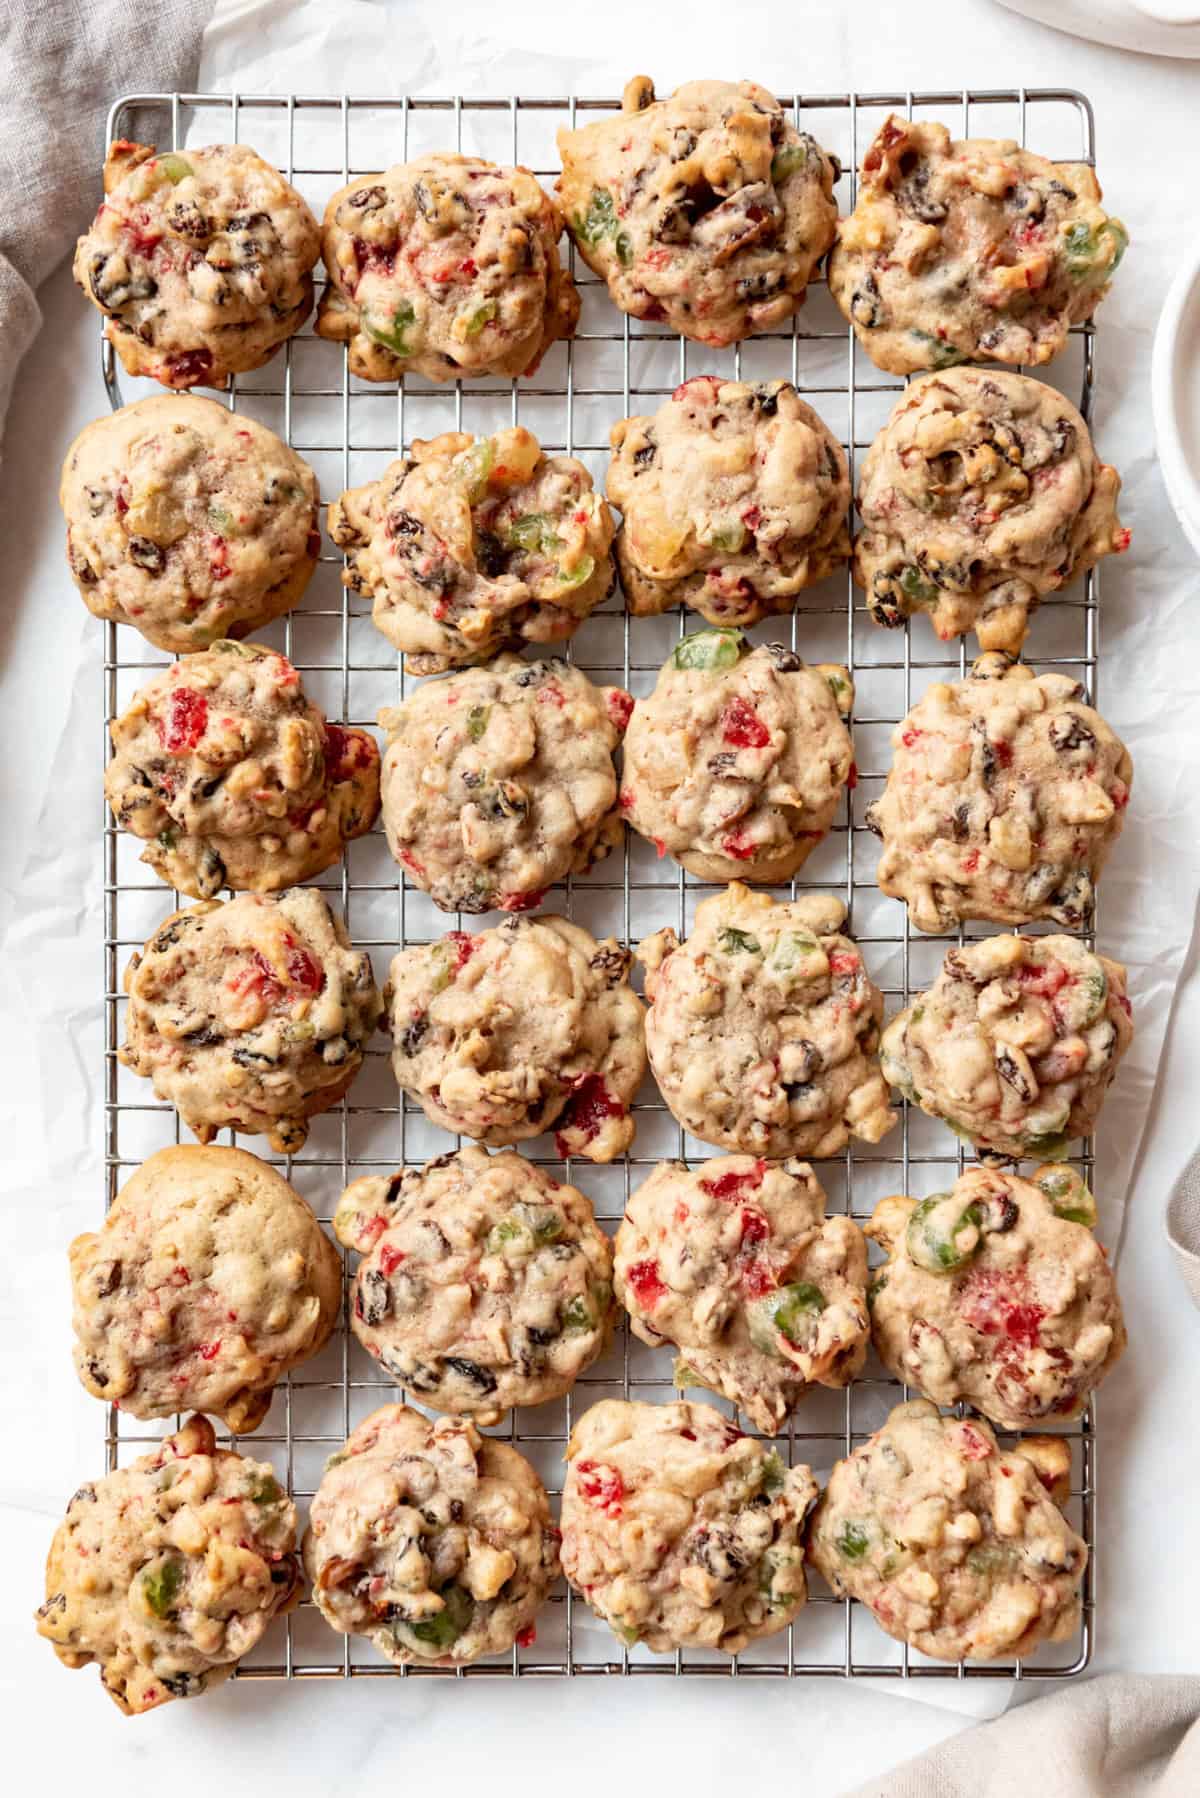 A batch of fruitcake cookies made with chopped candied cherries, pineapple, dates, and nuts on a wire cooling rack.